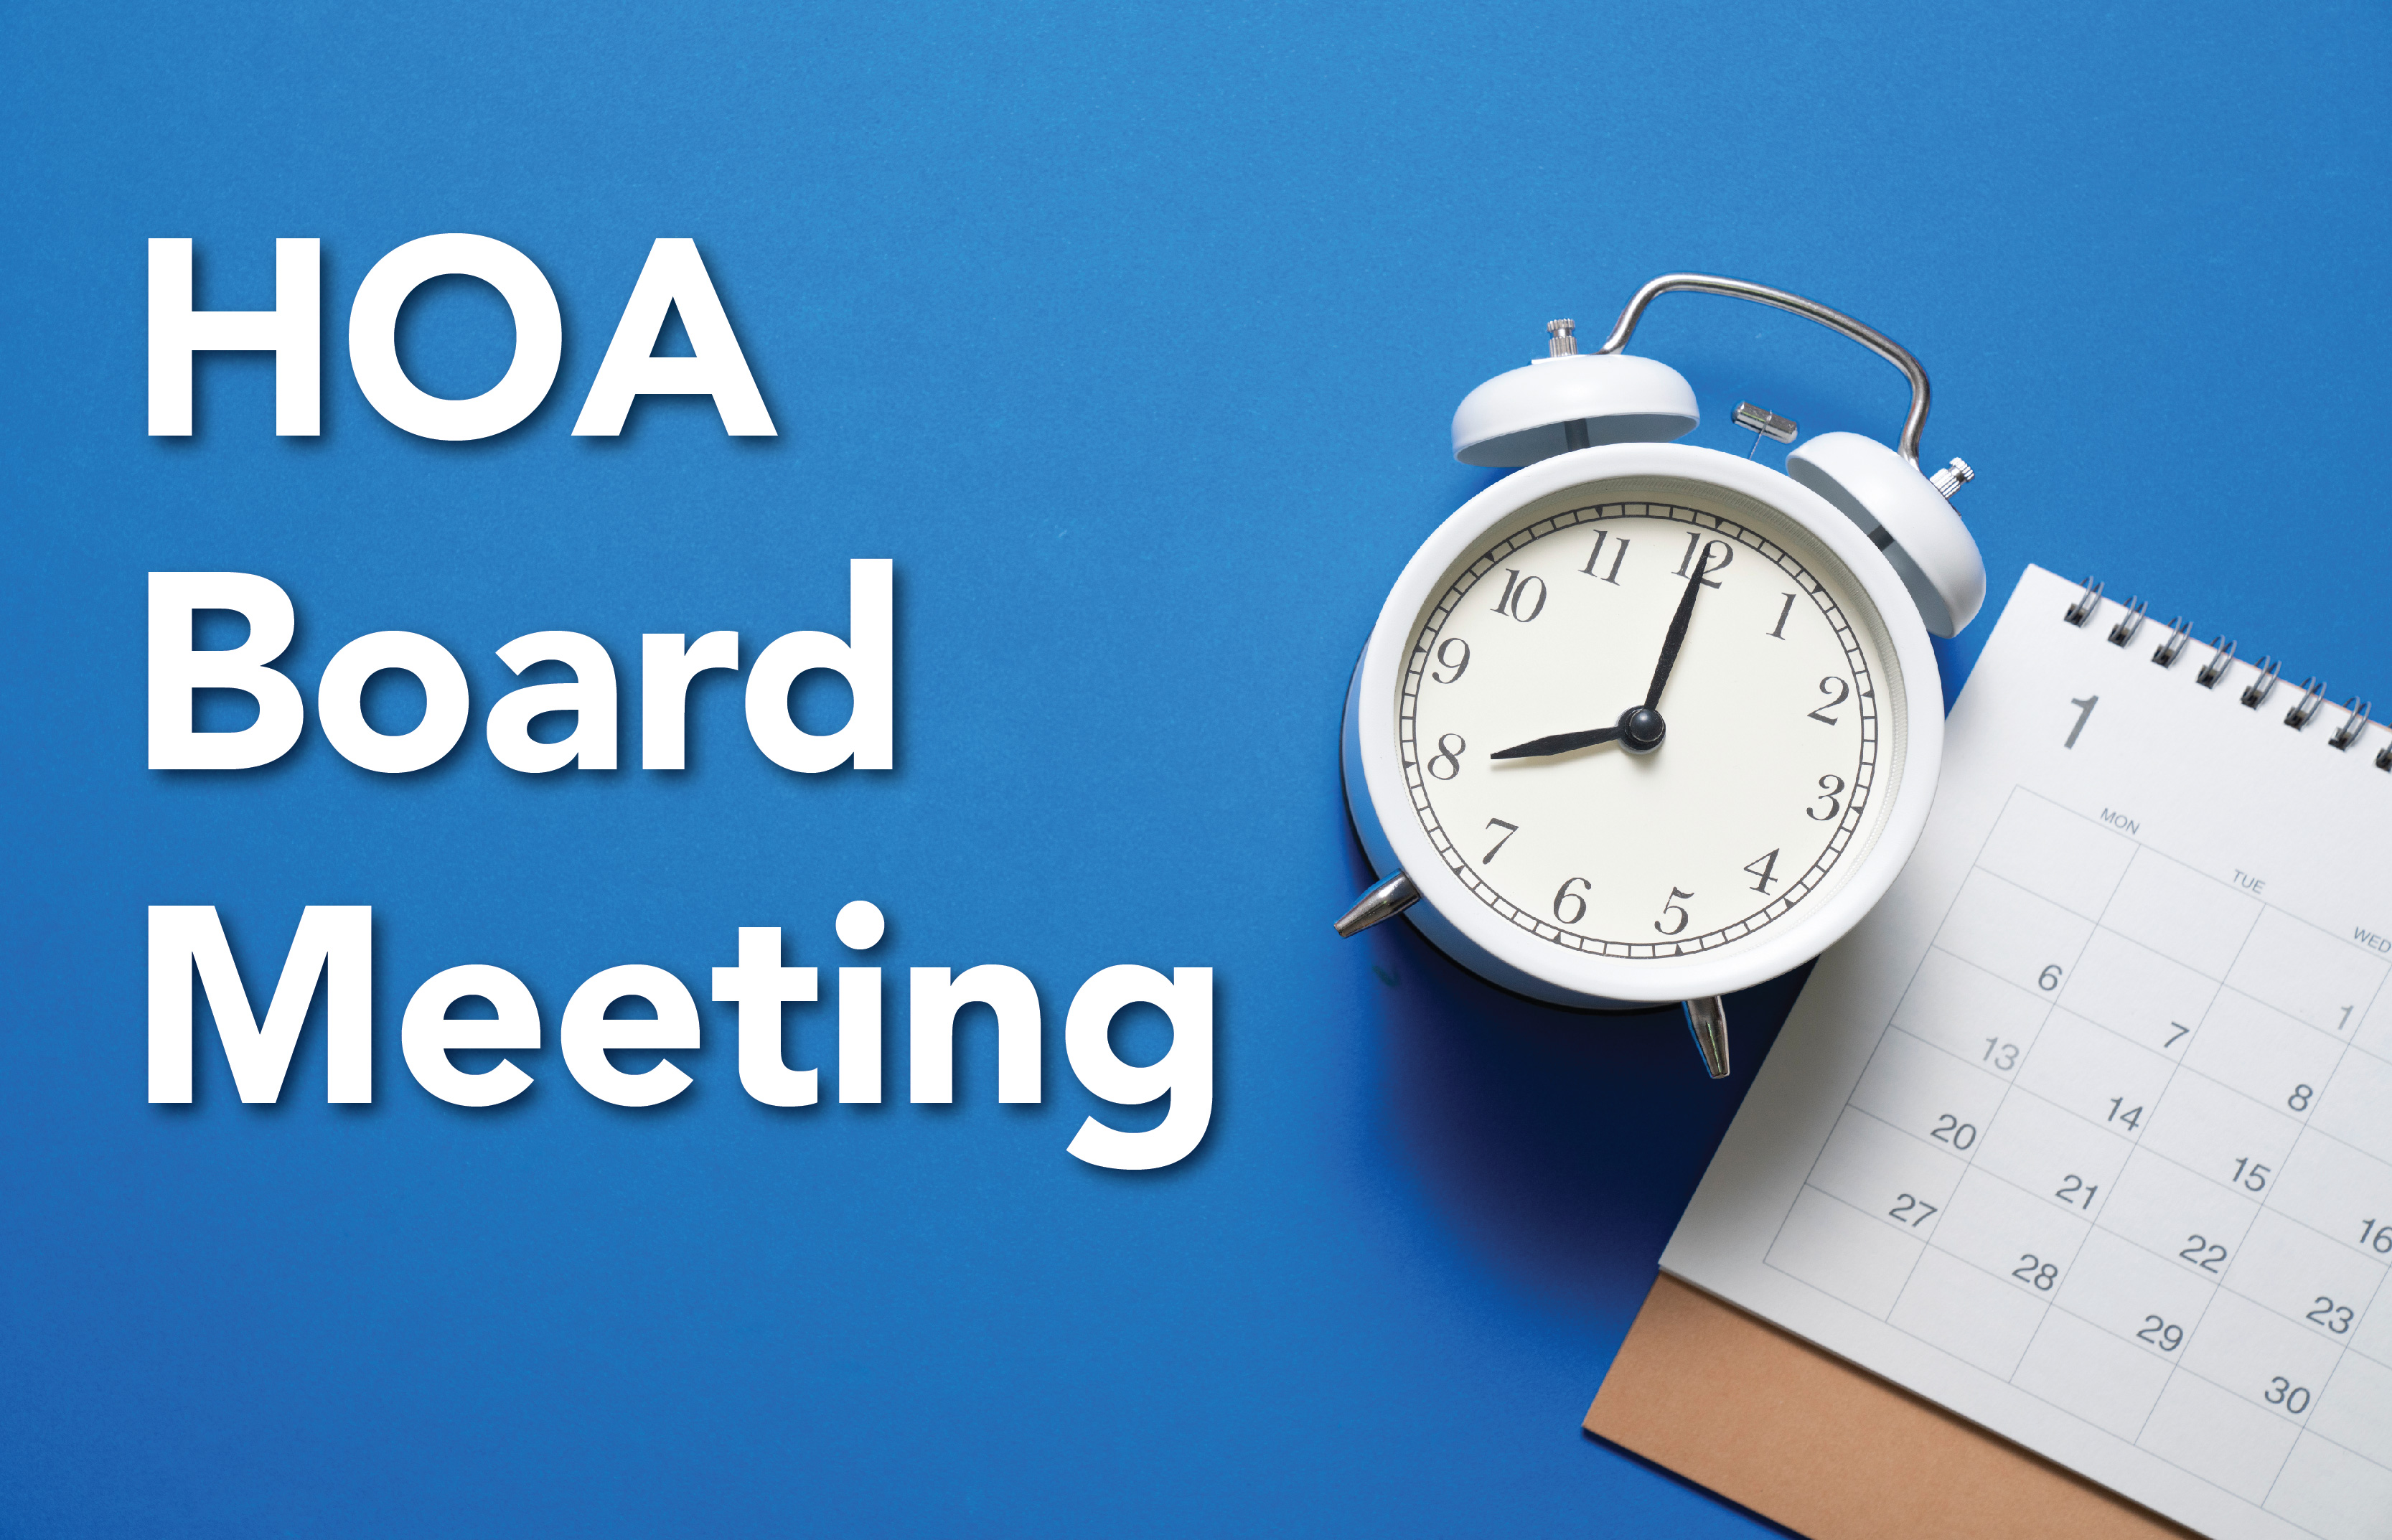 Grayson Lakes HOA Board Meeting Set for March 20